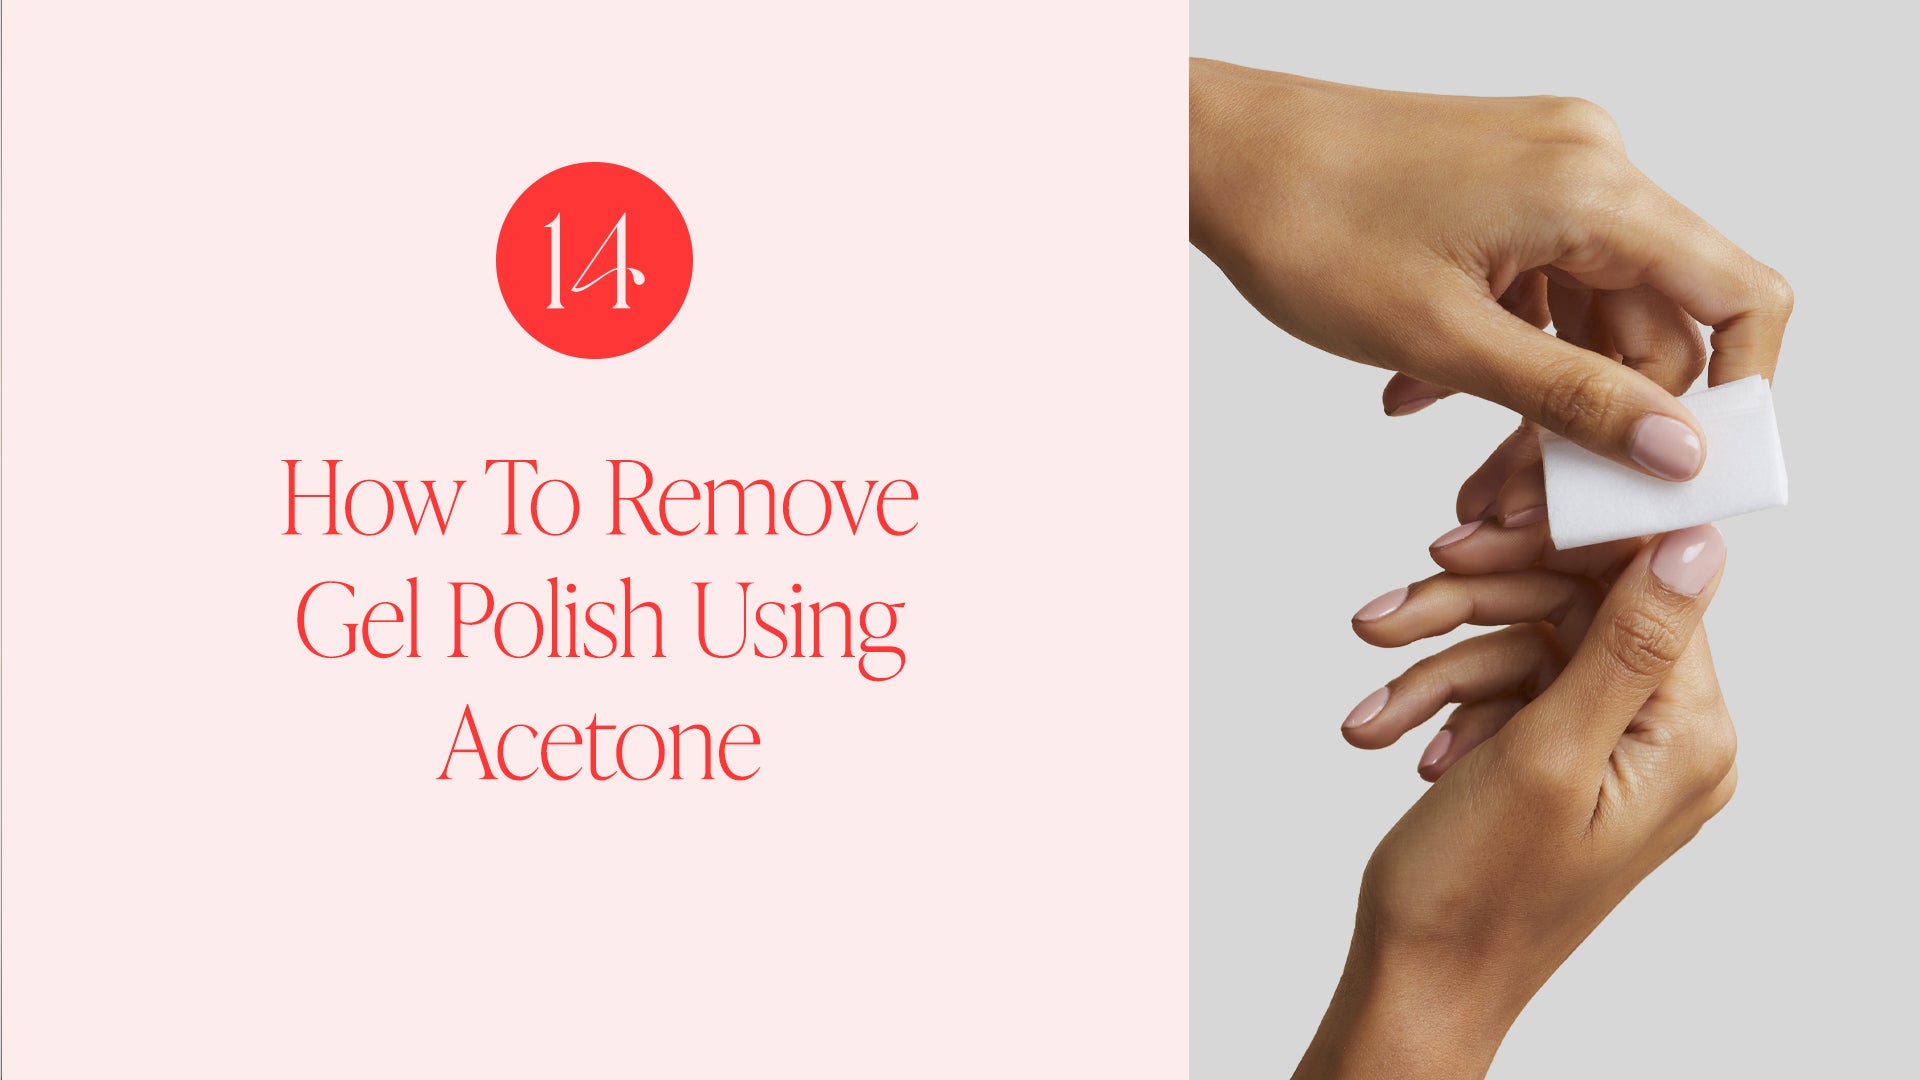 Load video: HOW TO REMOVE GEL POLISH USING ACETONE